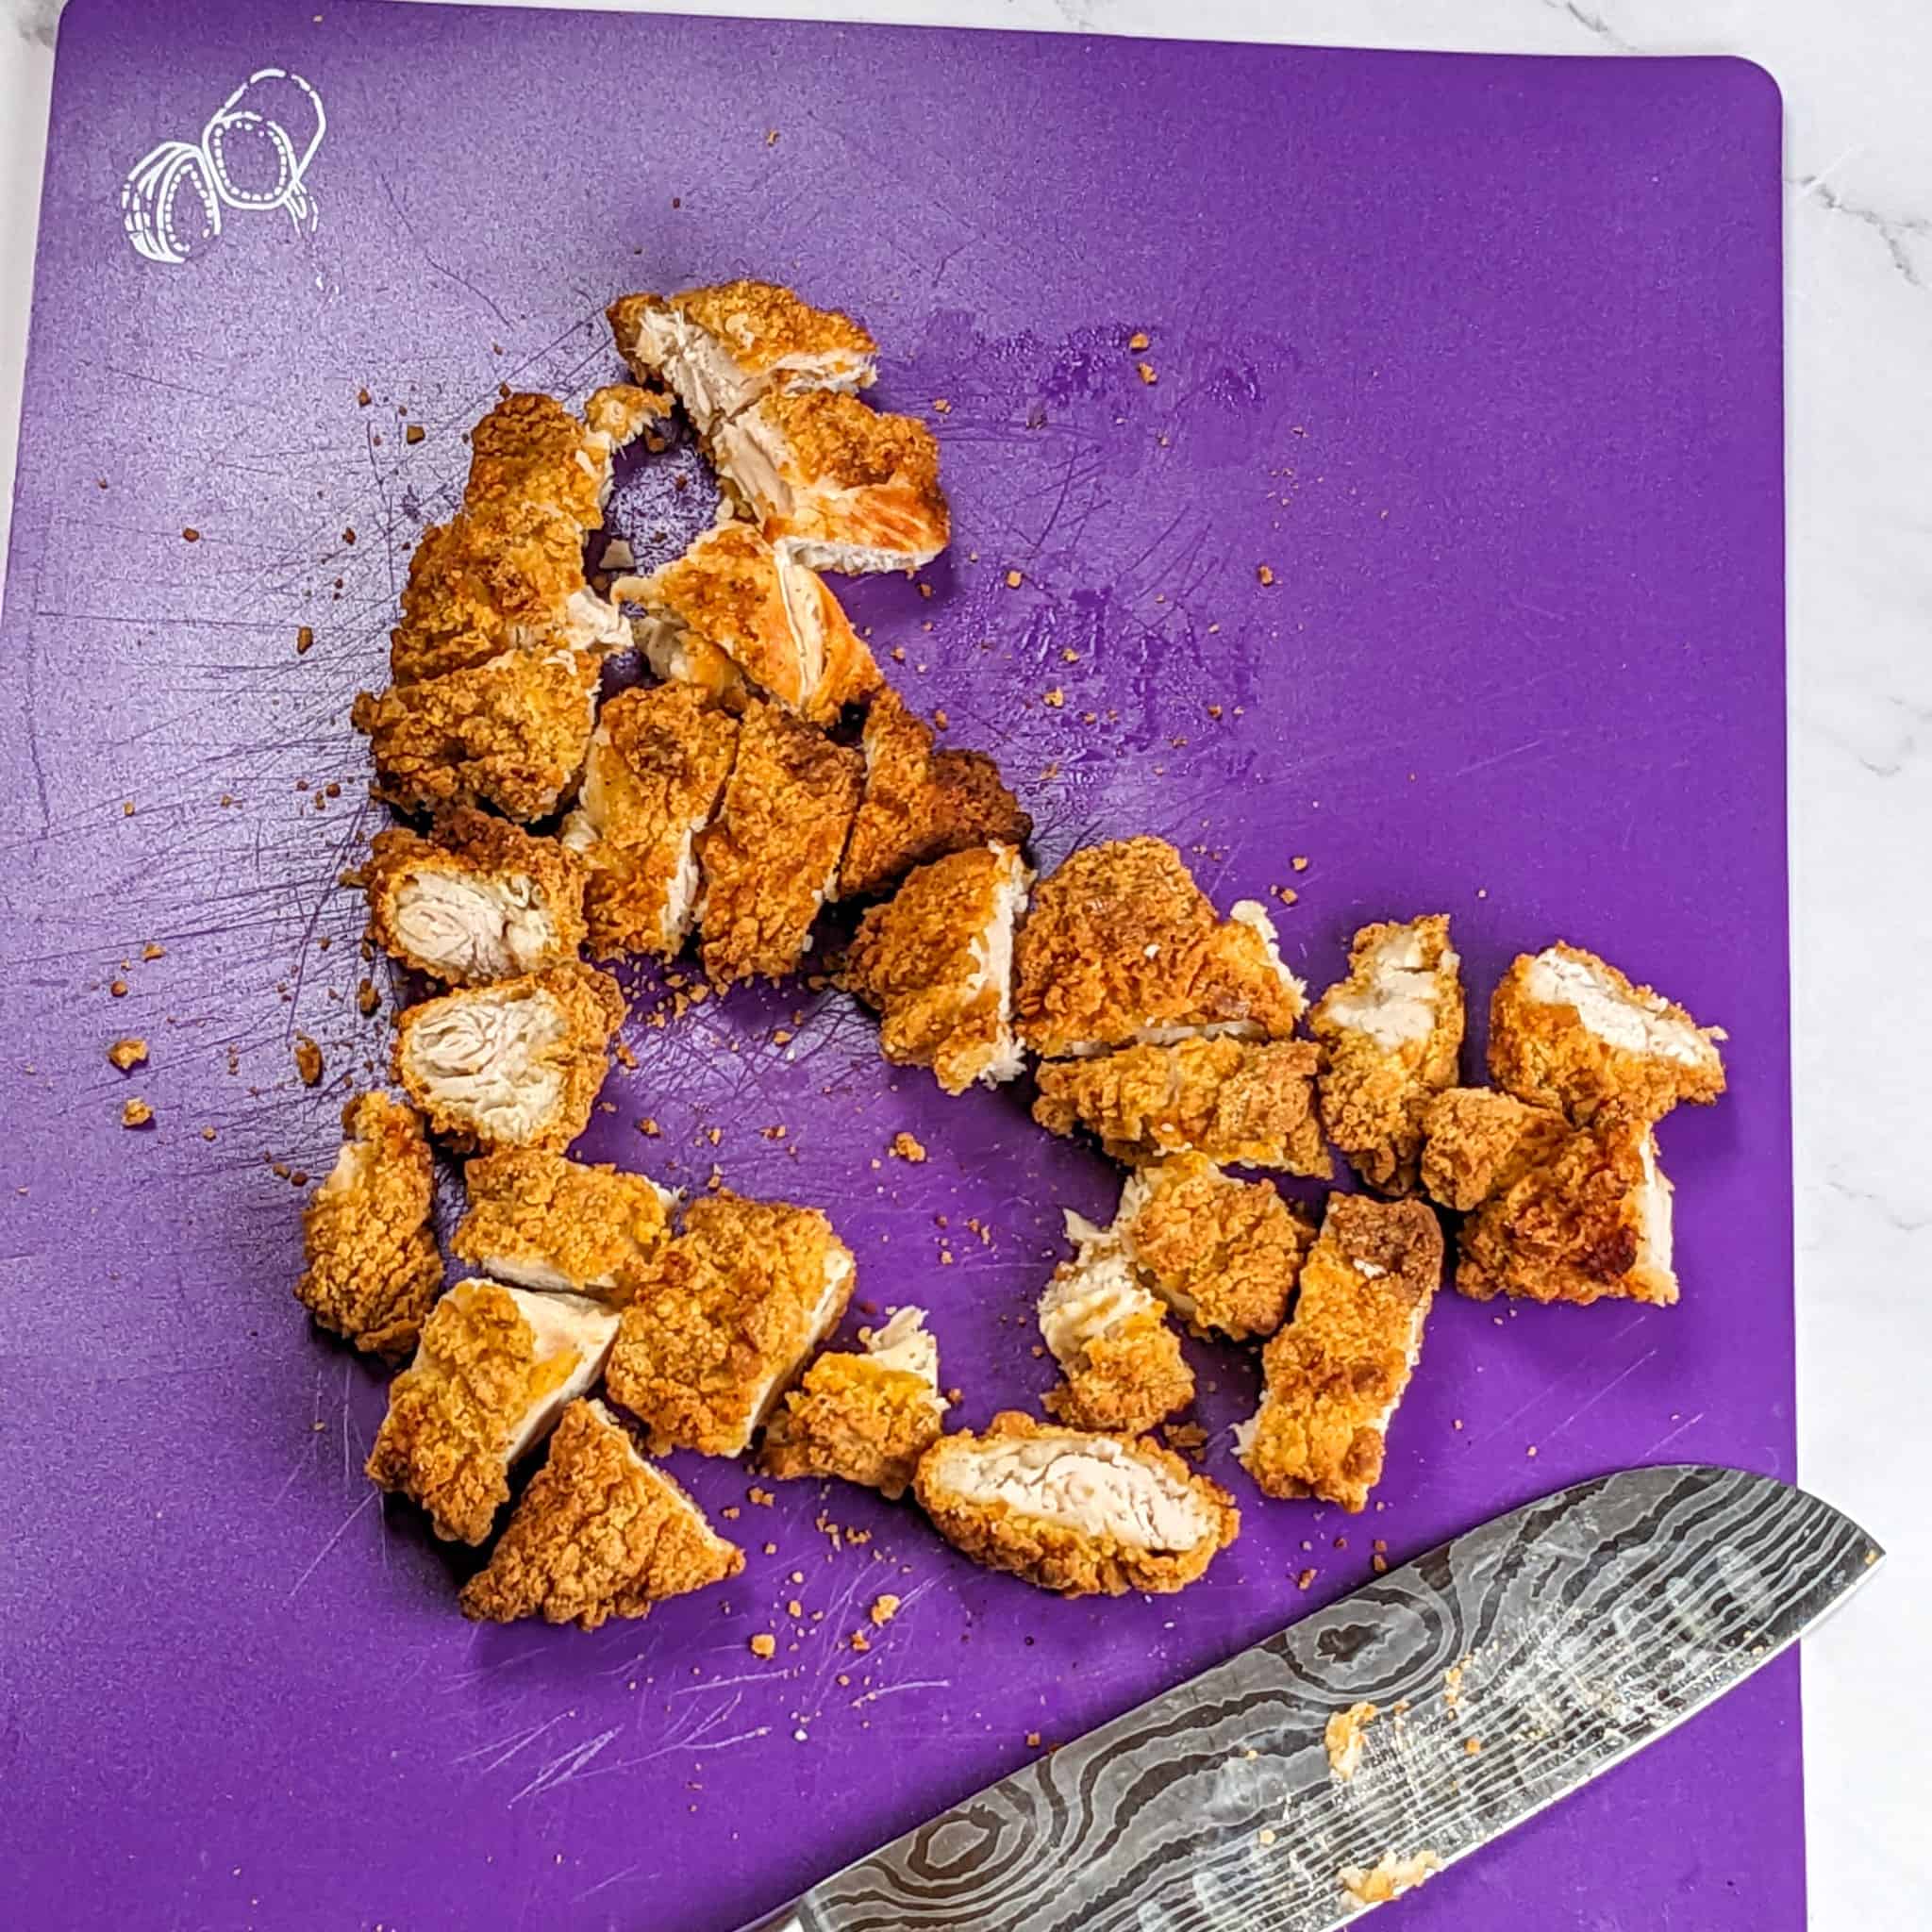 chopped chicken tenders on a cutting board for cooked meats next to a knife